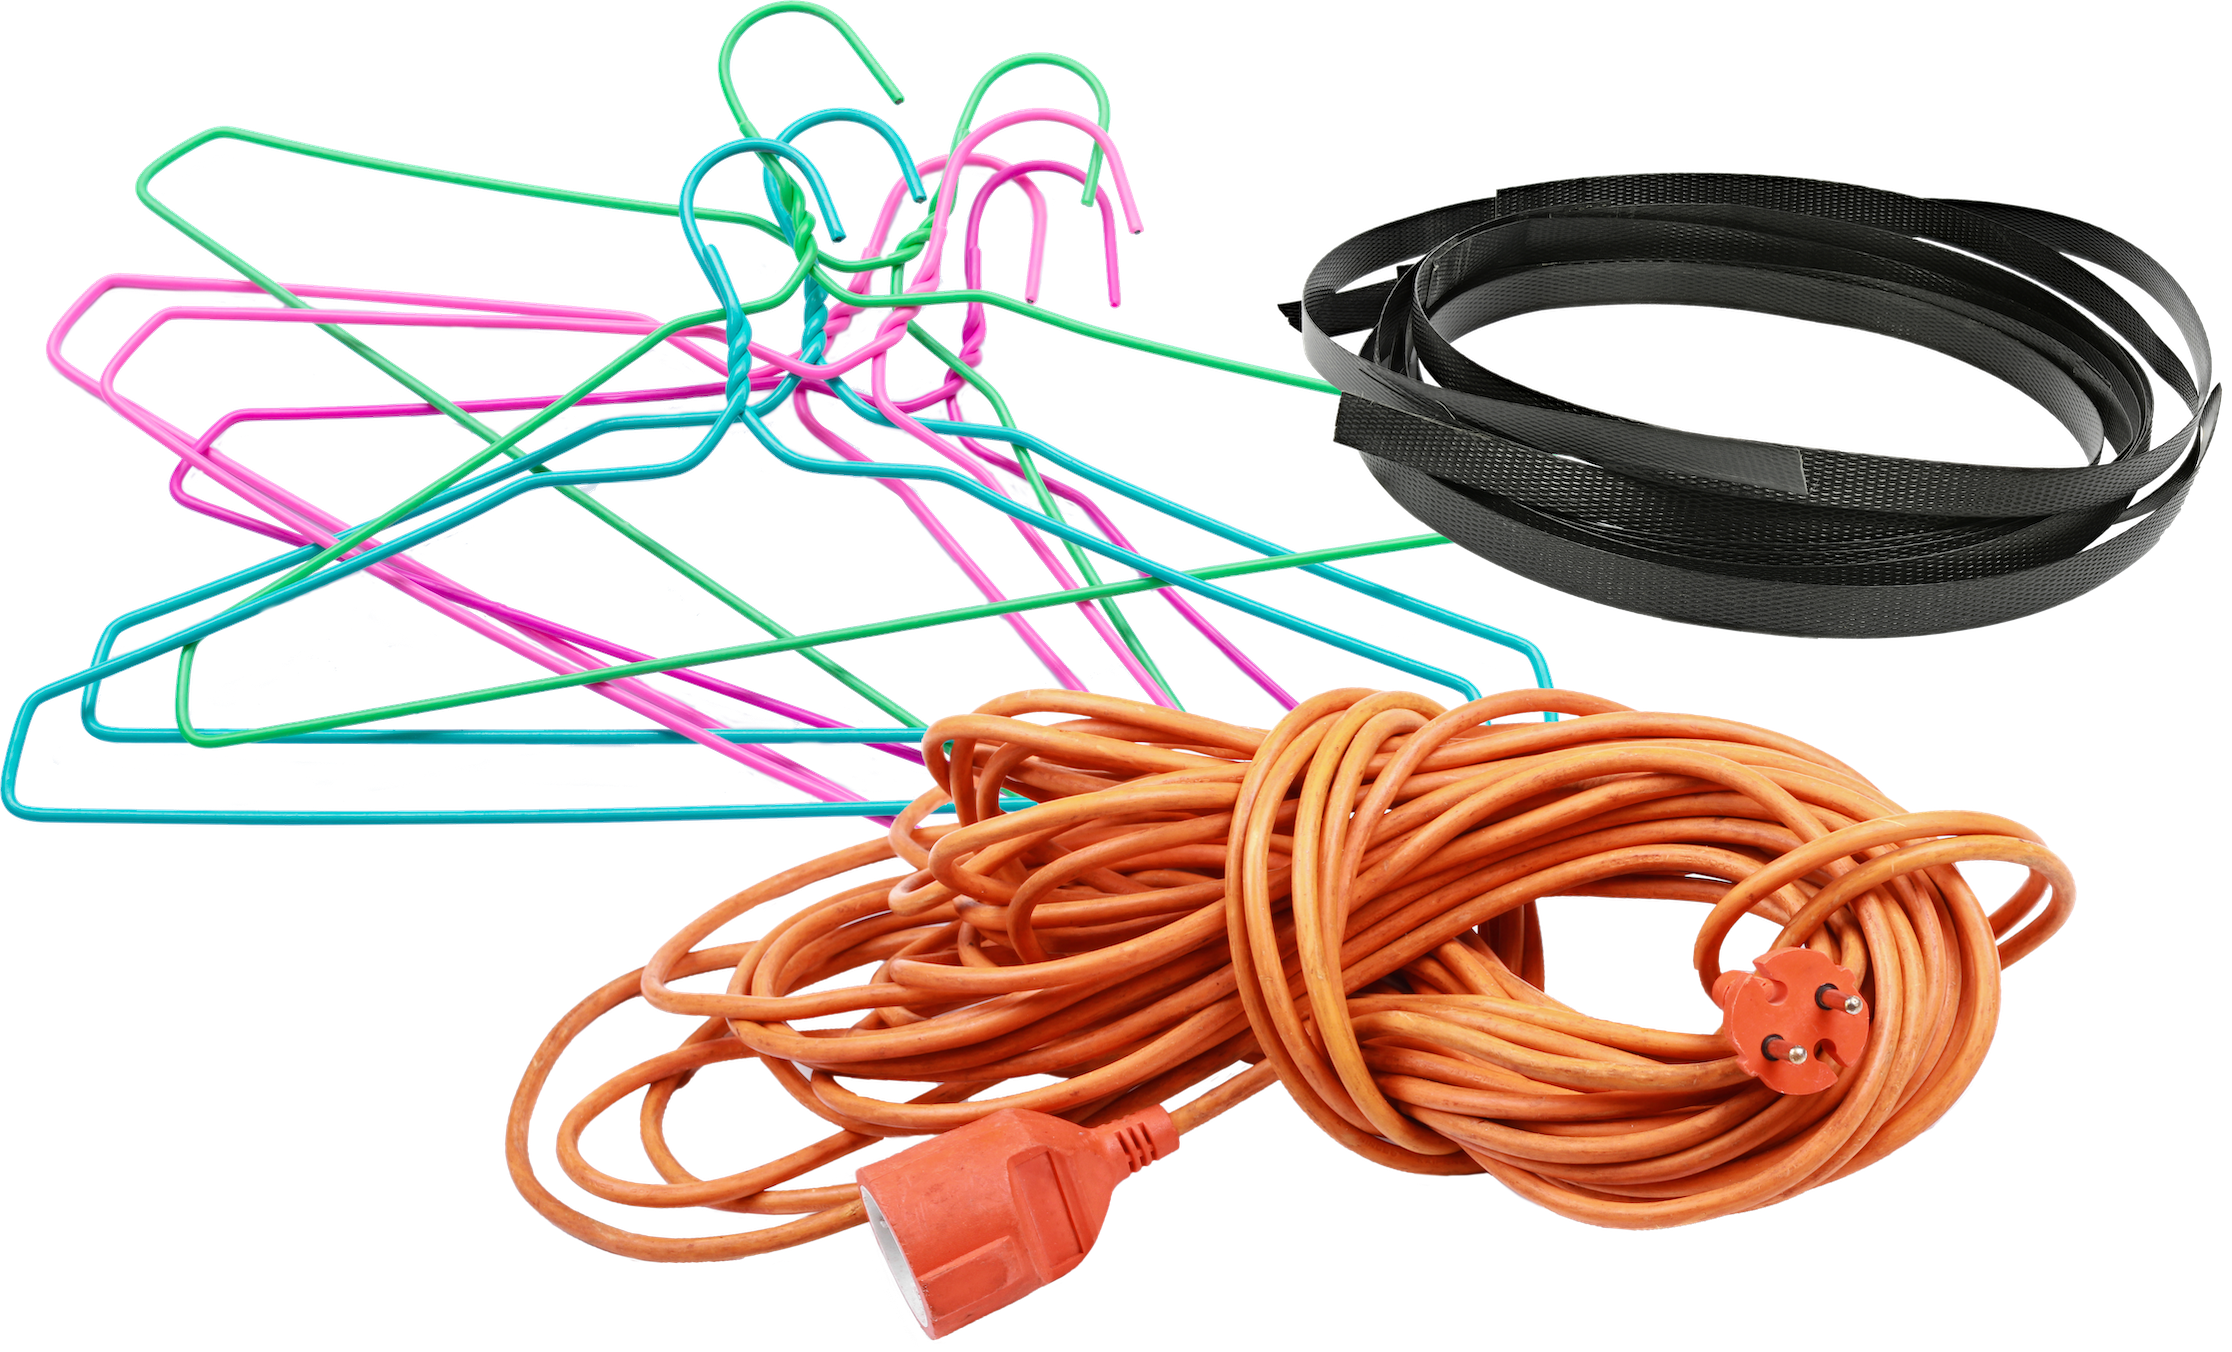 Hangers, electrical cords, plastic packaging straps image